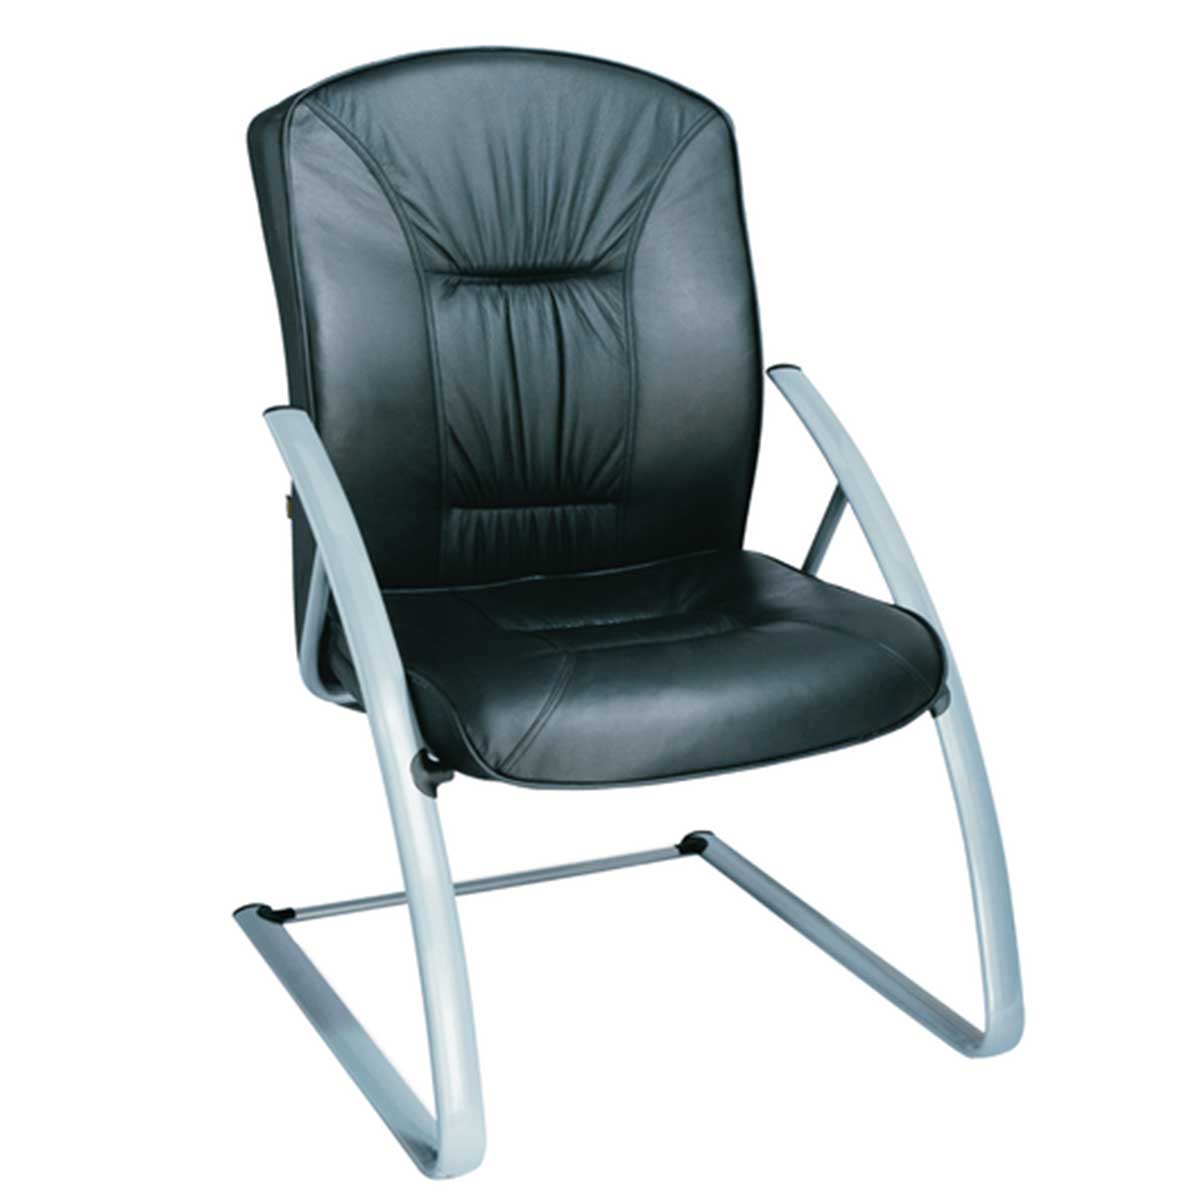 Leather office chair Manufacturers, Suppliers in Kailash Colony